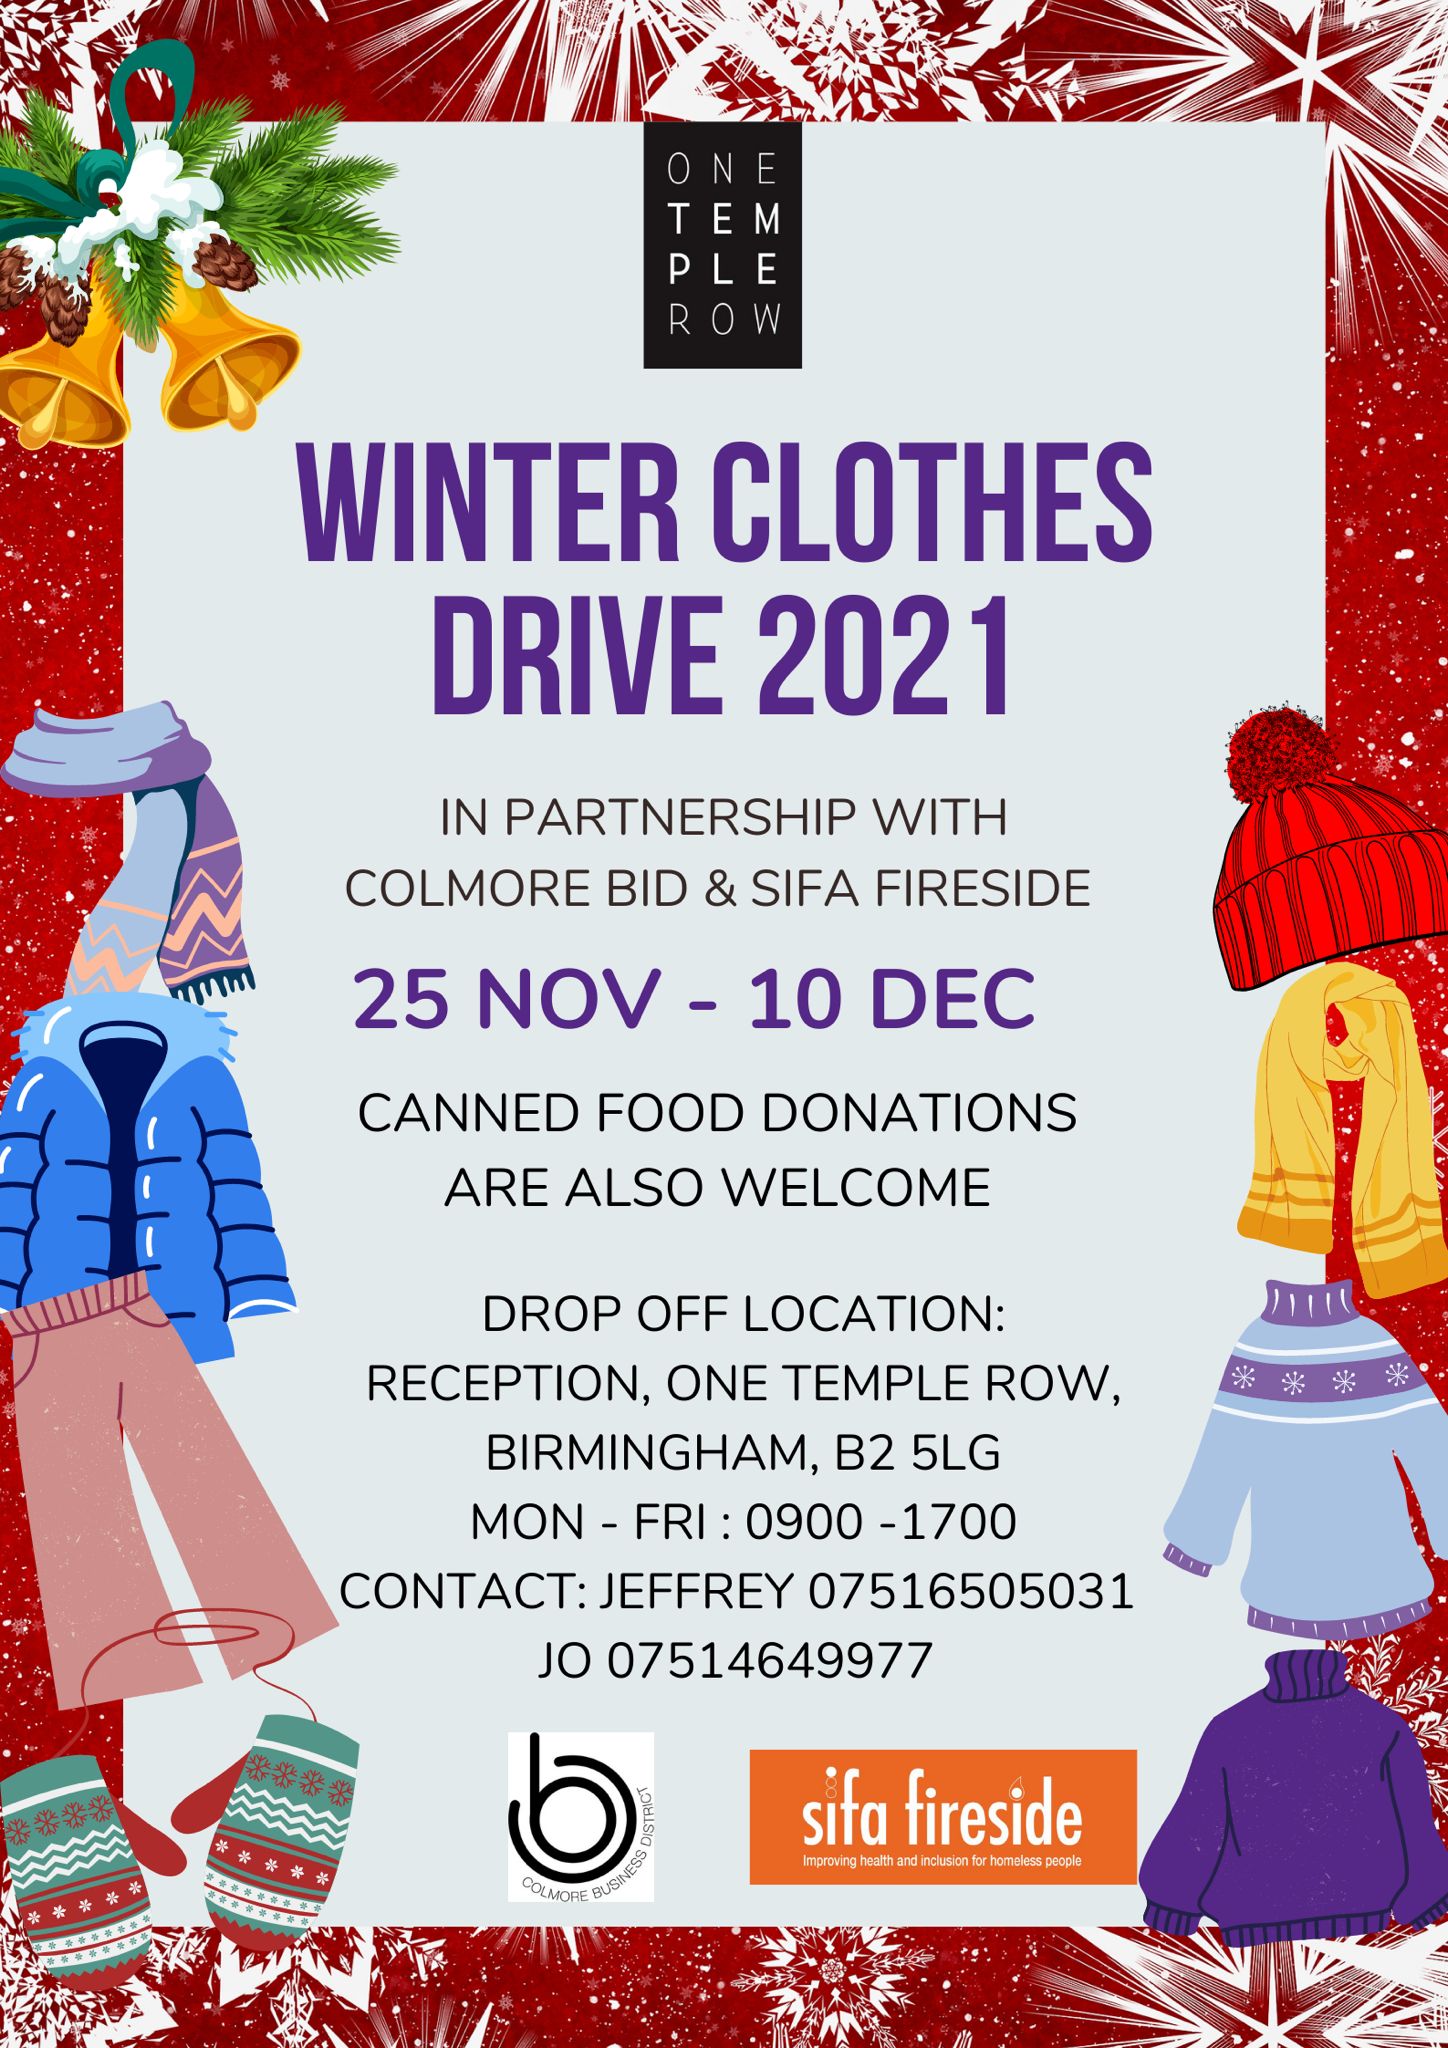 PHOTO 2021 11 23 15 11 48 One Temple Row launches Winter Clothes Drive